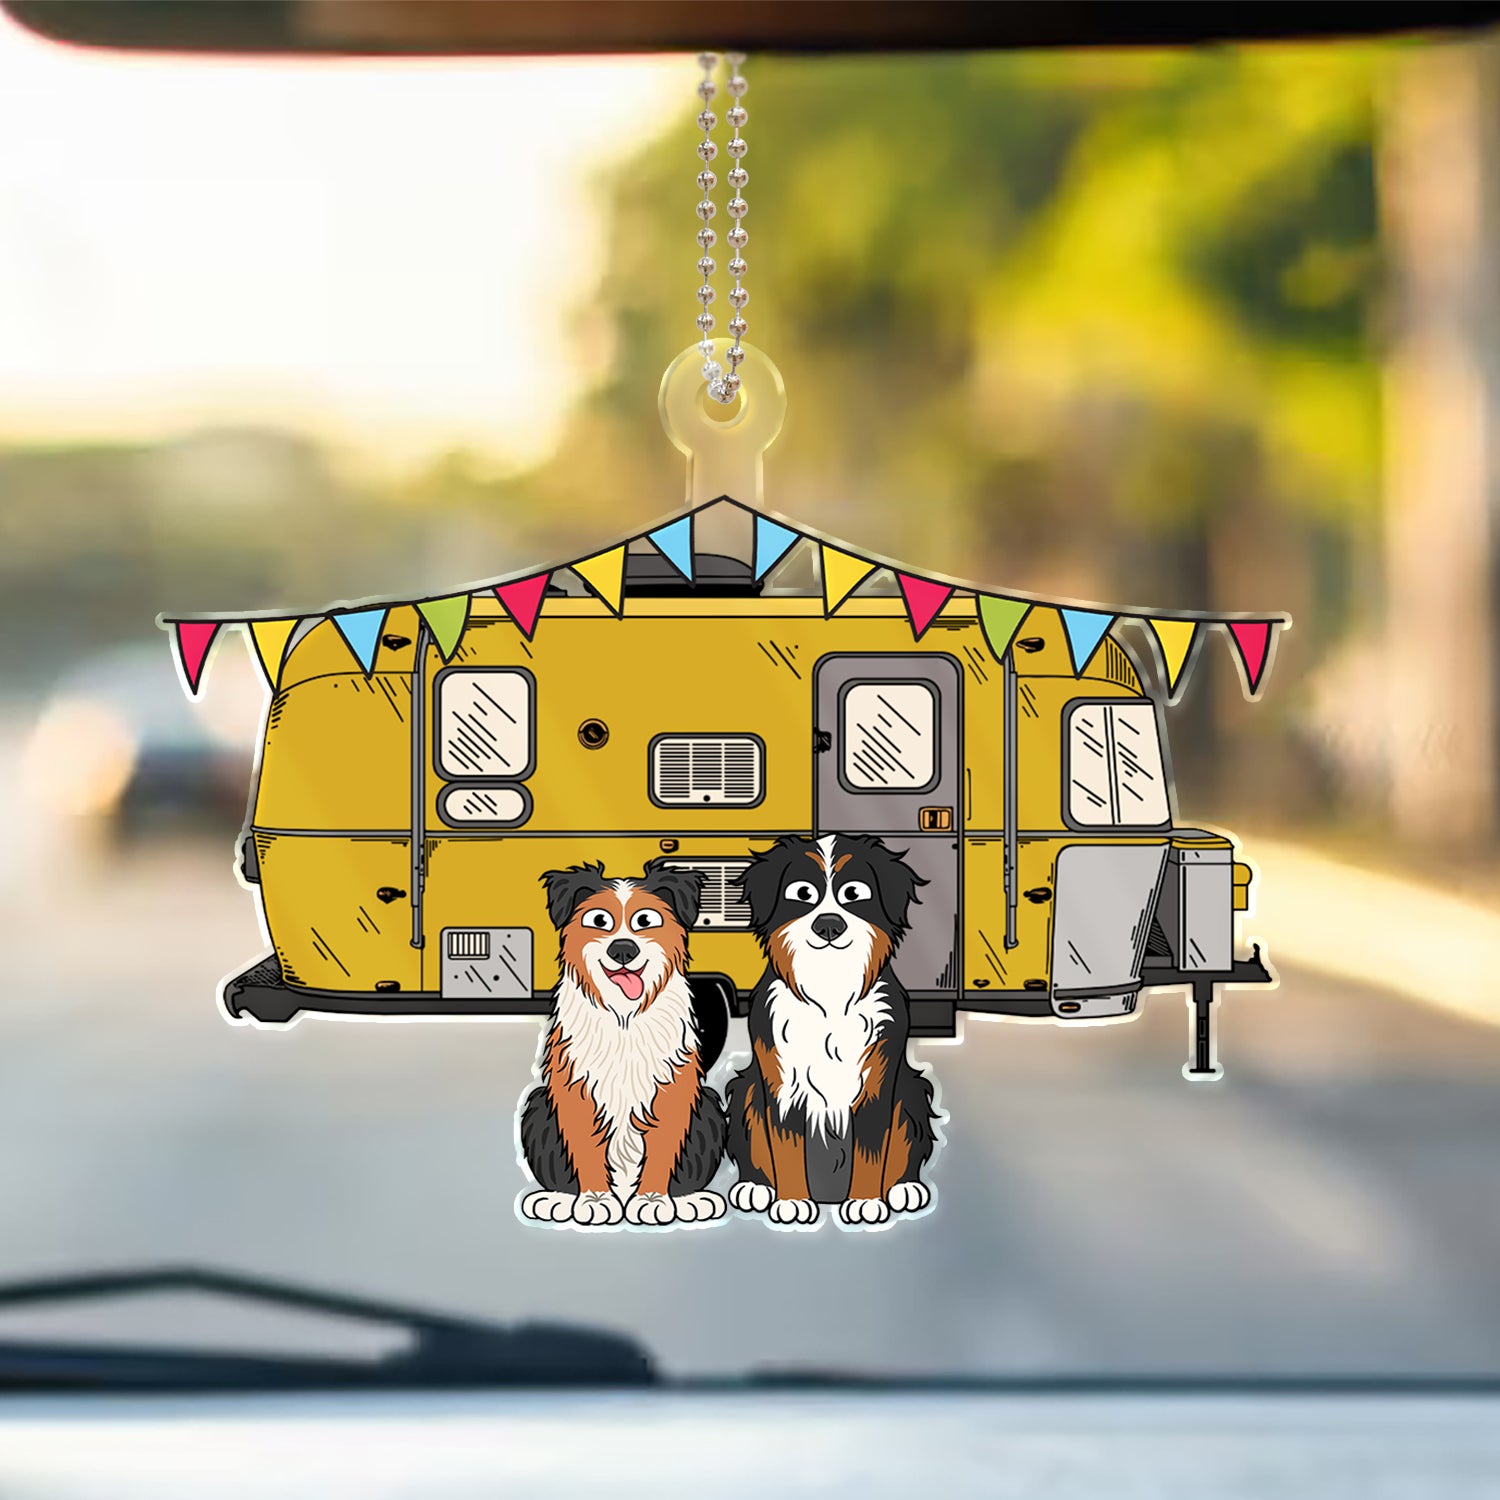 RV & Dog - Gift For The One Loved Camping With Dog - Personalized Acrylic Car Hanger